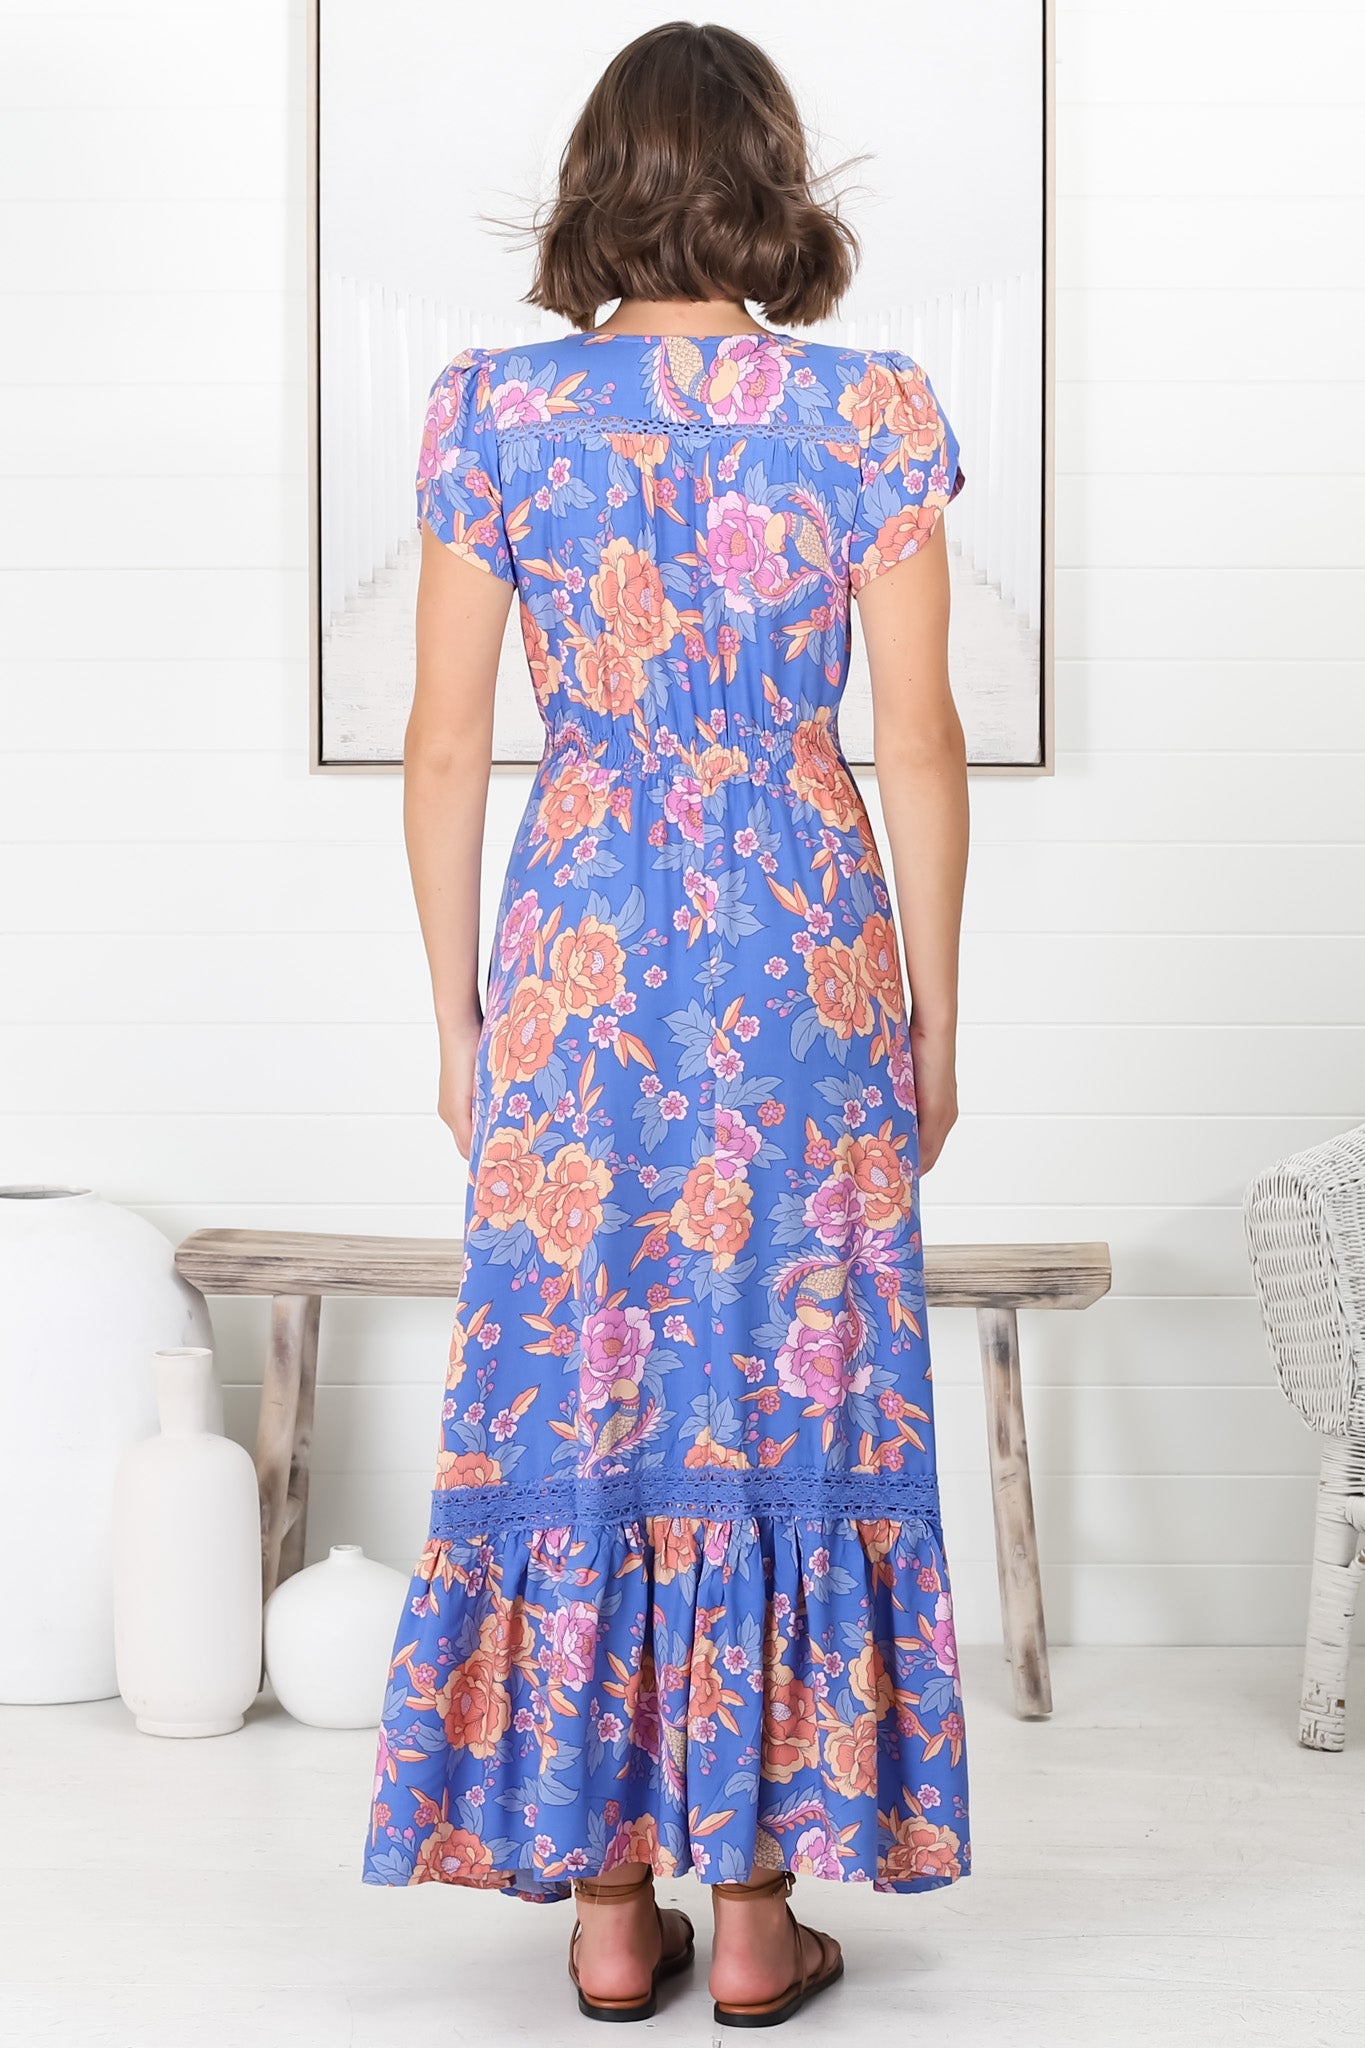 JAASE - Carmen Maxi Dress: Butterfly Cap Sleeve Button Down A Line Dress with Lace Trim in Glastonbury Print